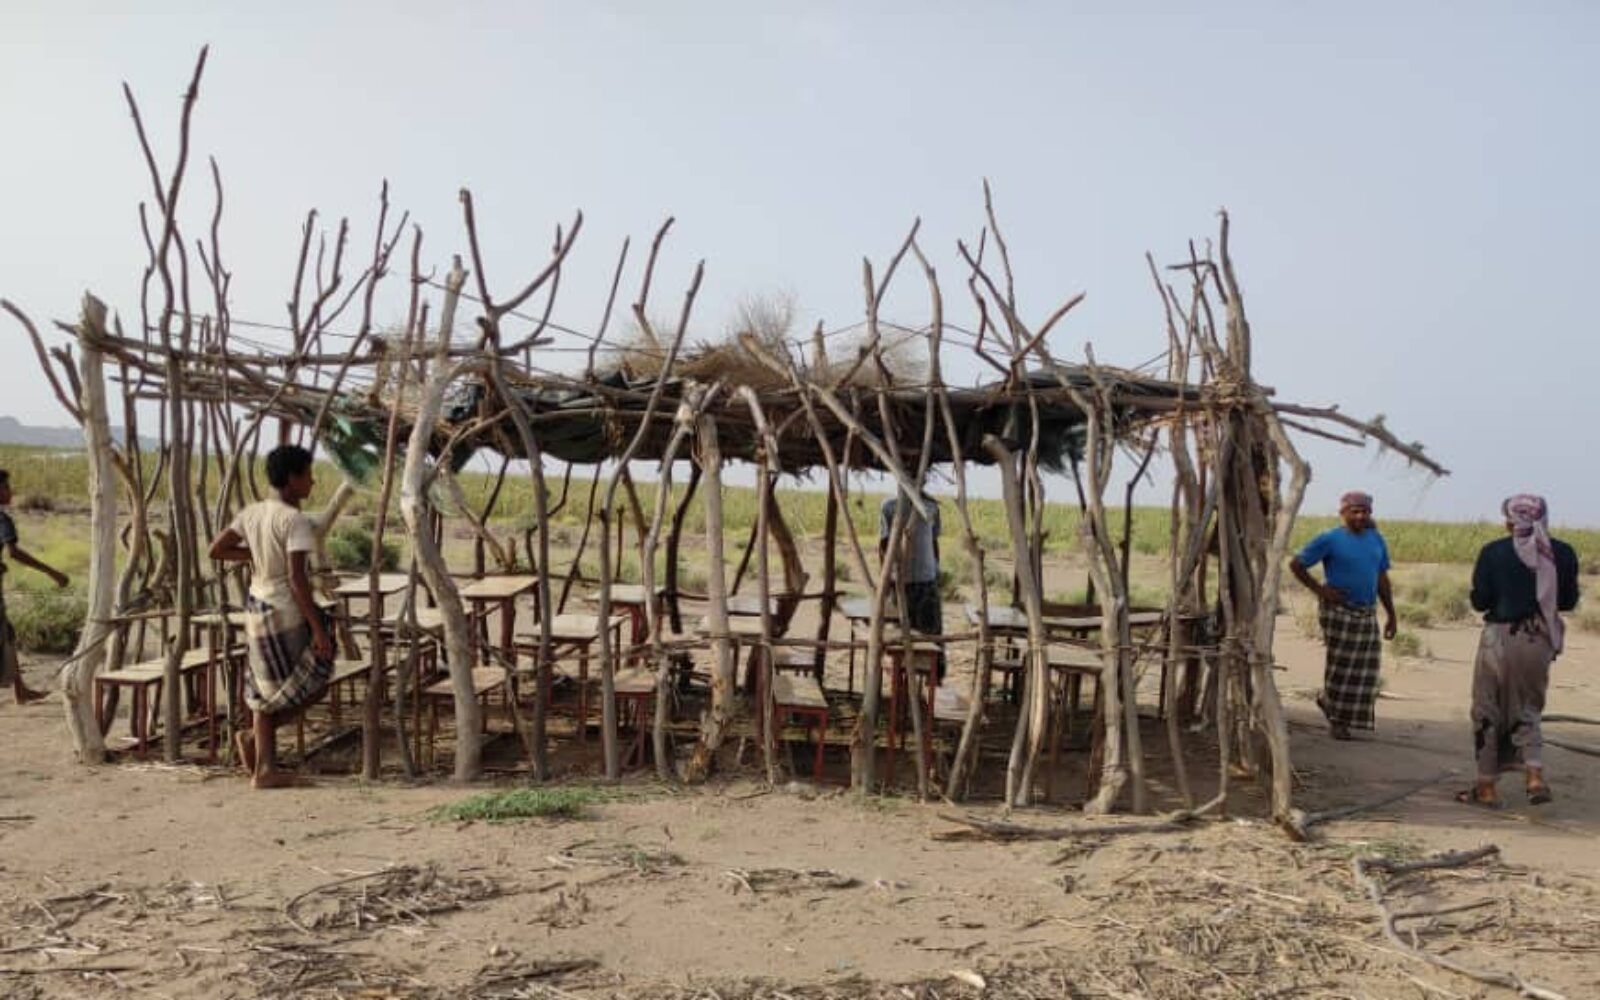 From straw classrooms to a modern school